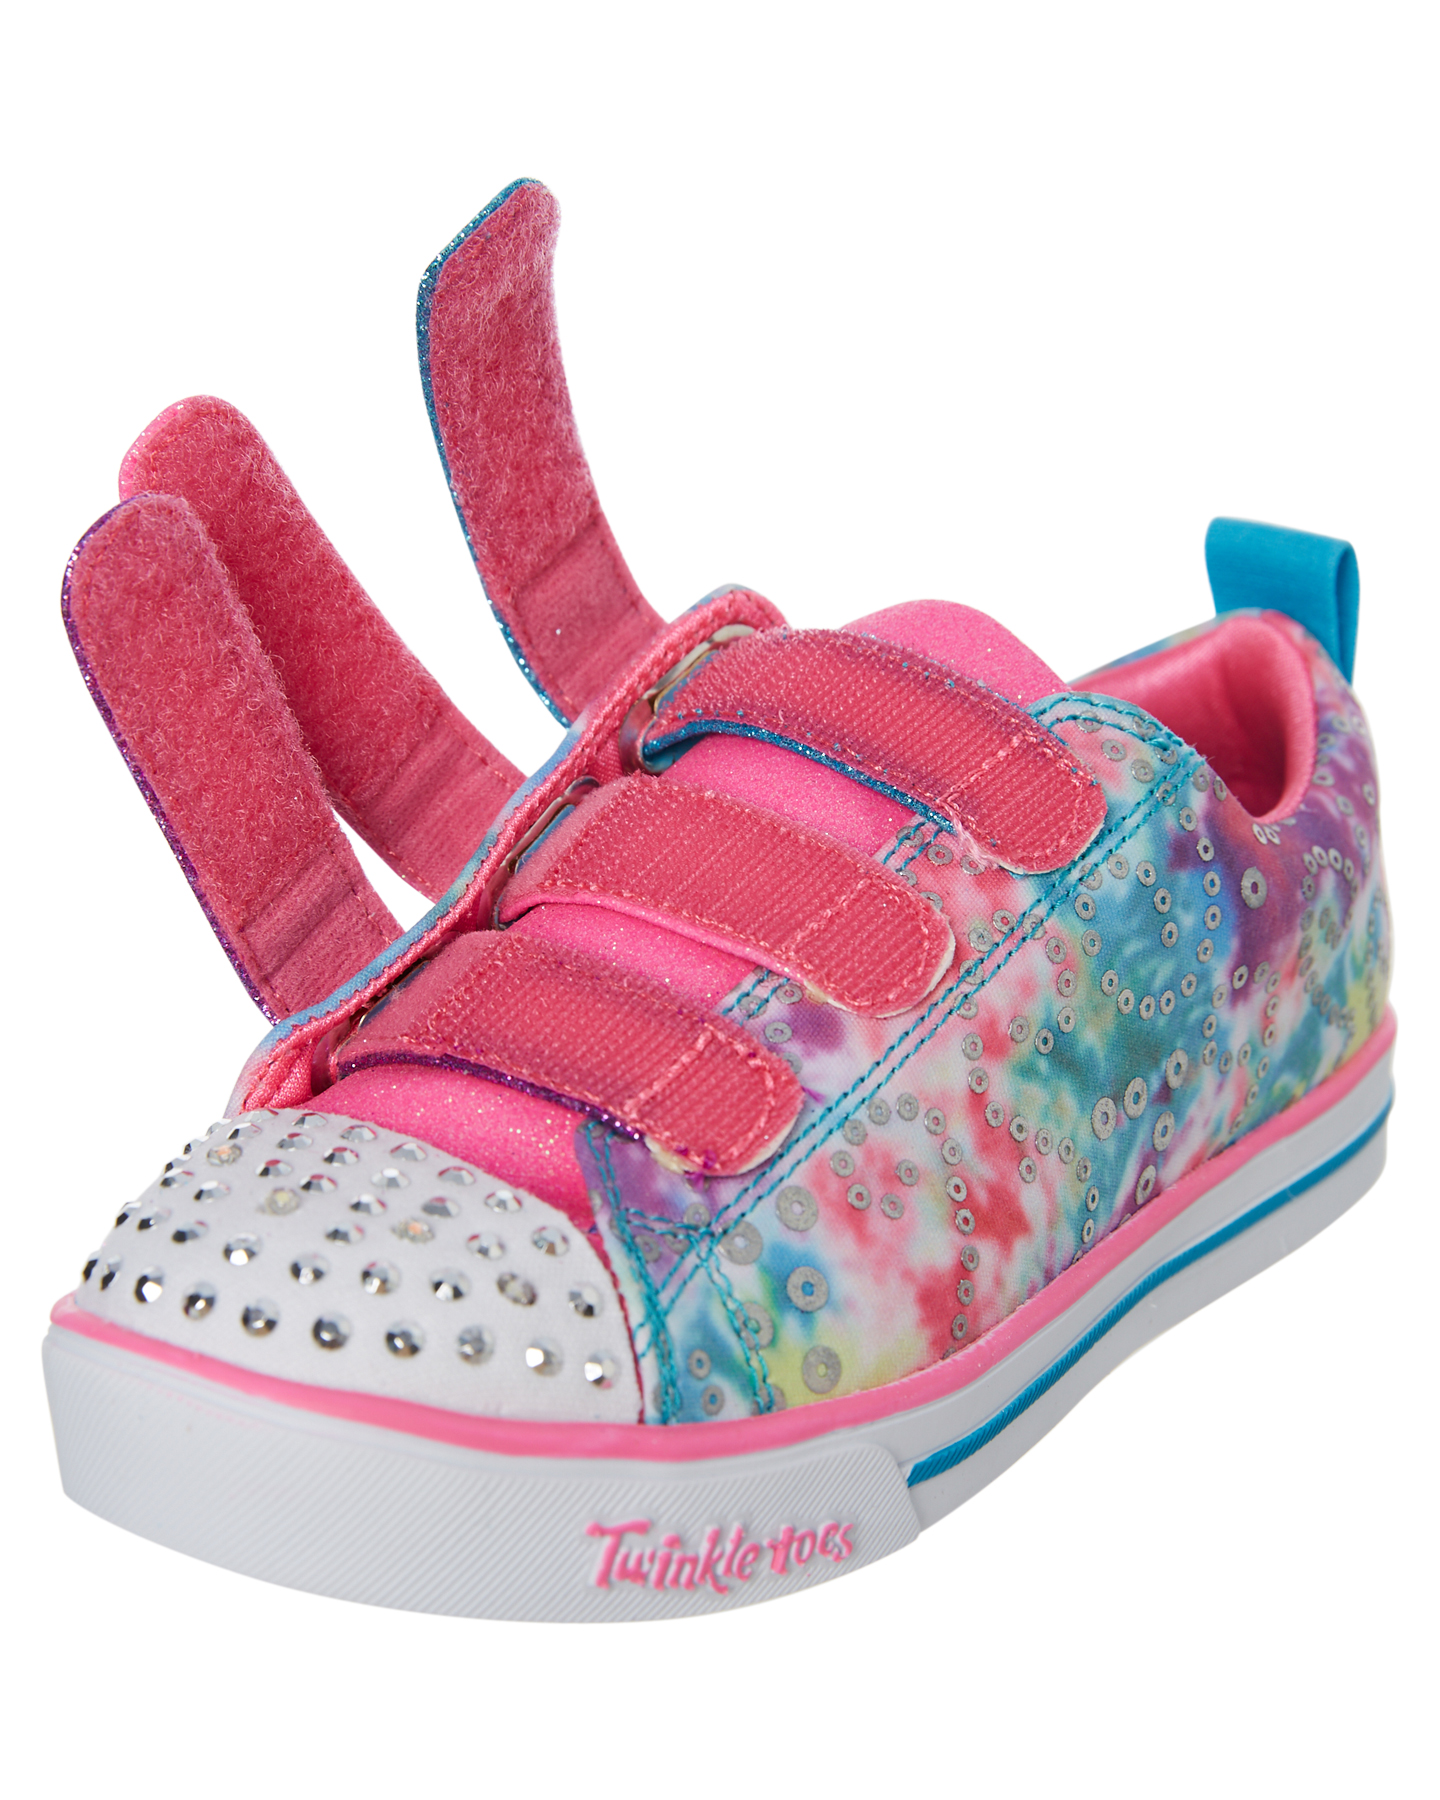 Skechers Girls Sparkle Lite Twinkle Toes Shoe - Youth - Rainbow Brights ...